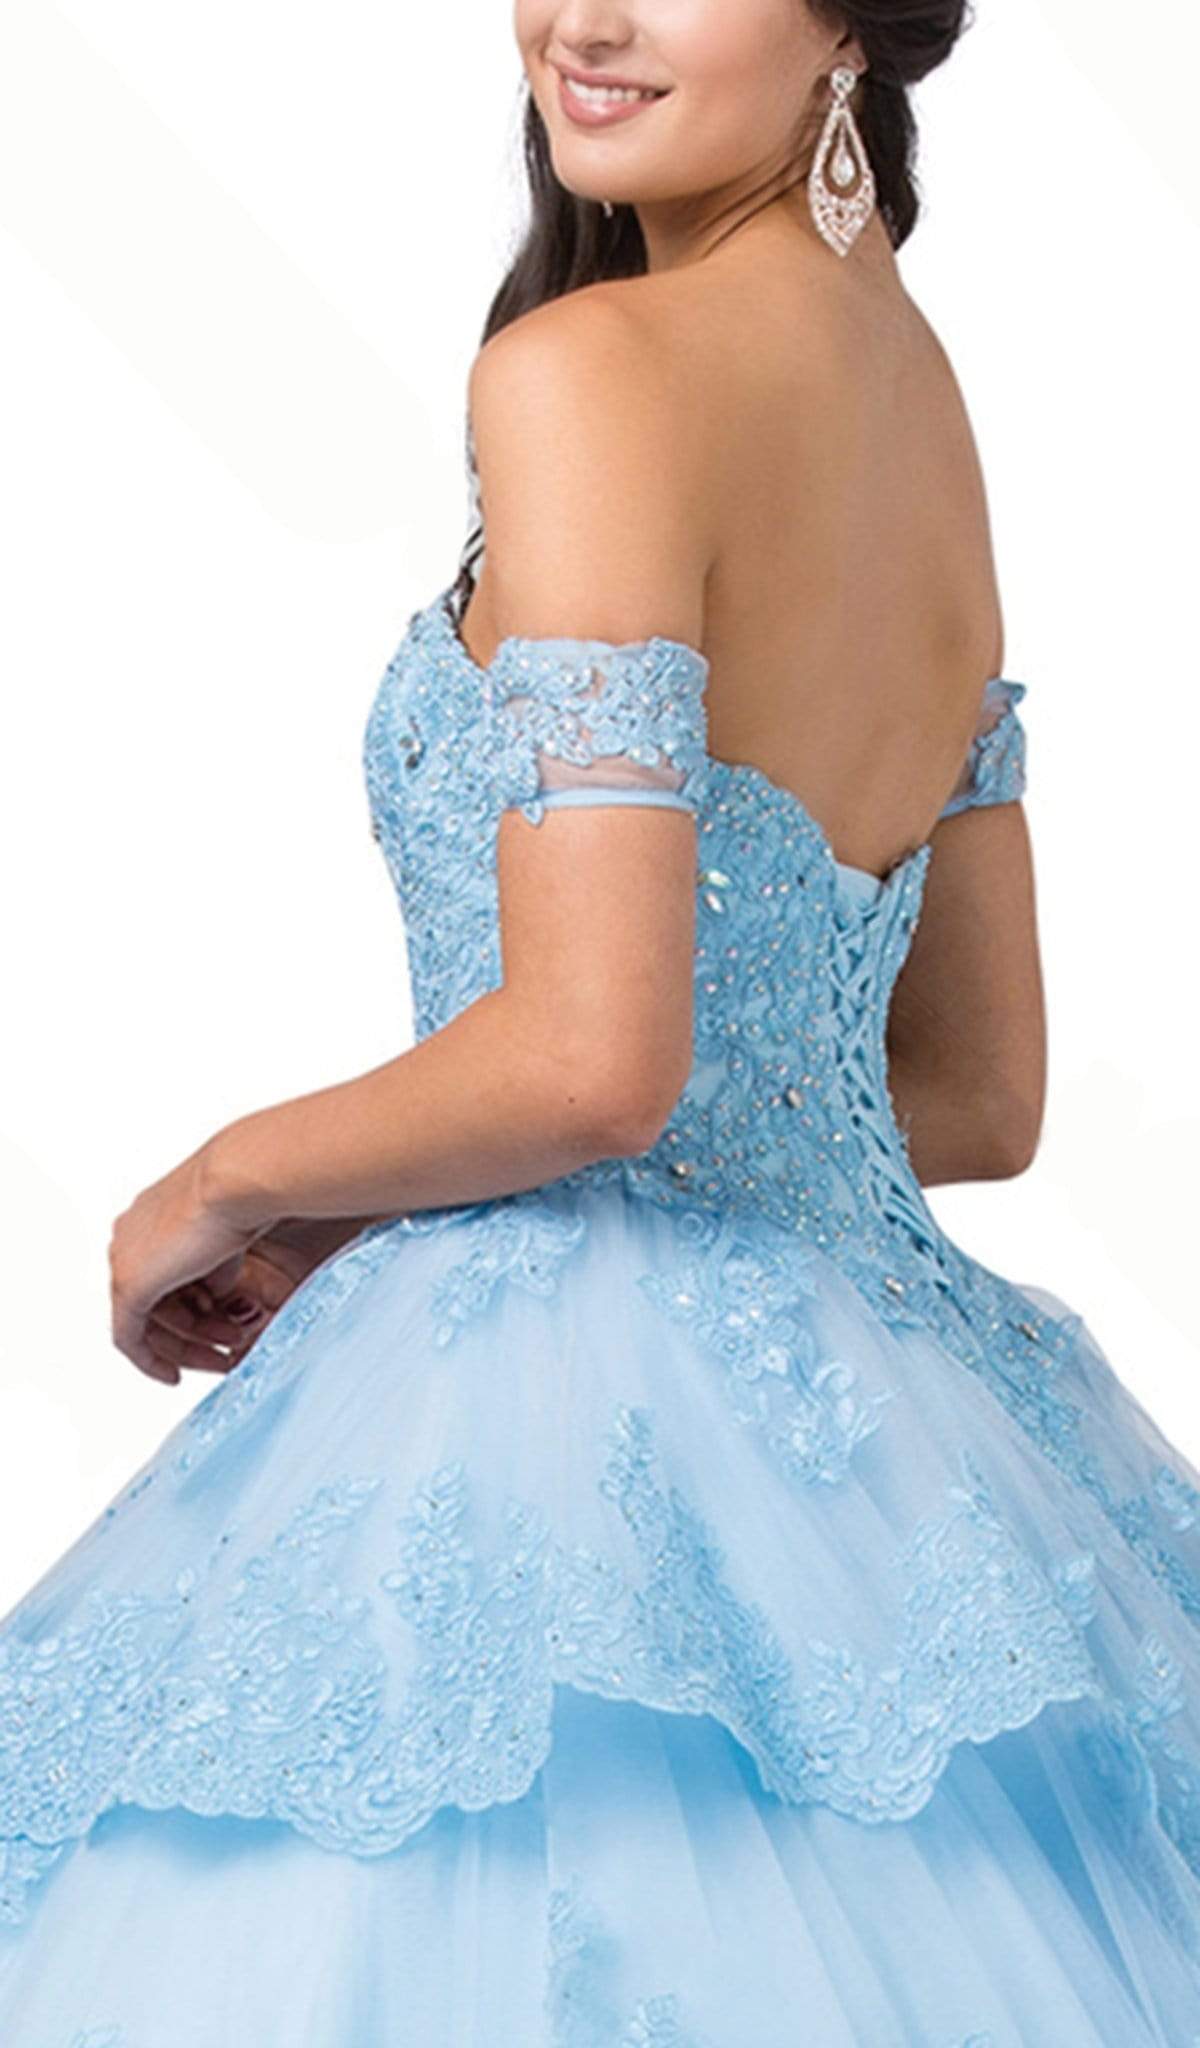 Dancing Queen - 1404 Strapless Sweetheart Tiered Scallop Hem Ballgown Special Occasion Dress